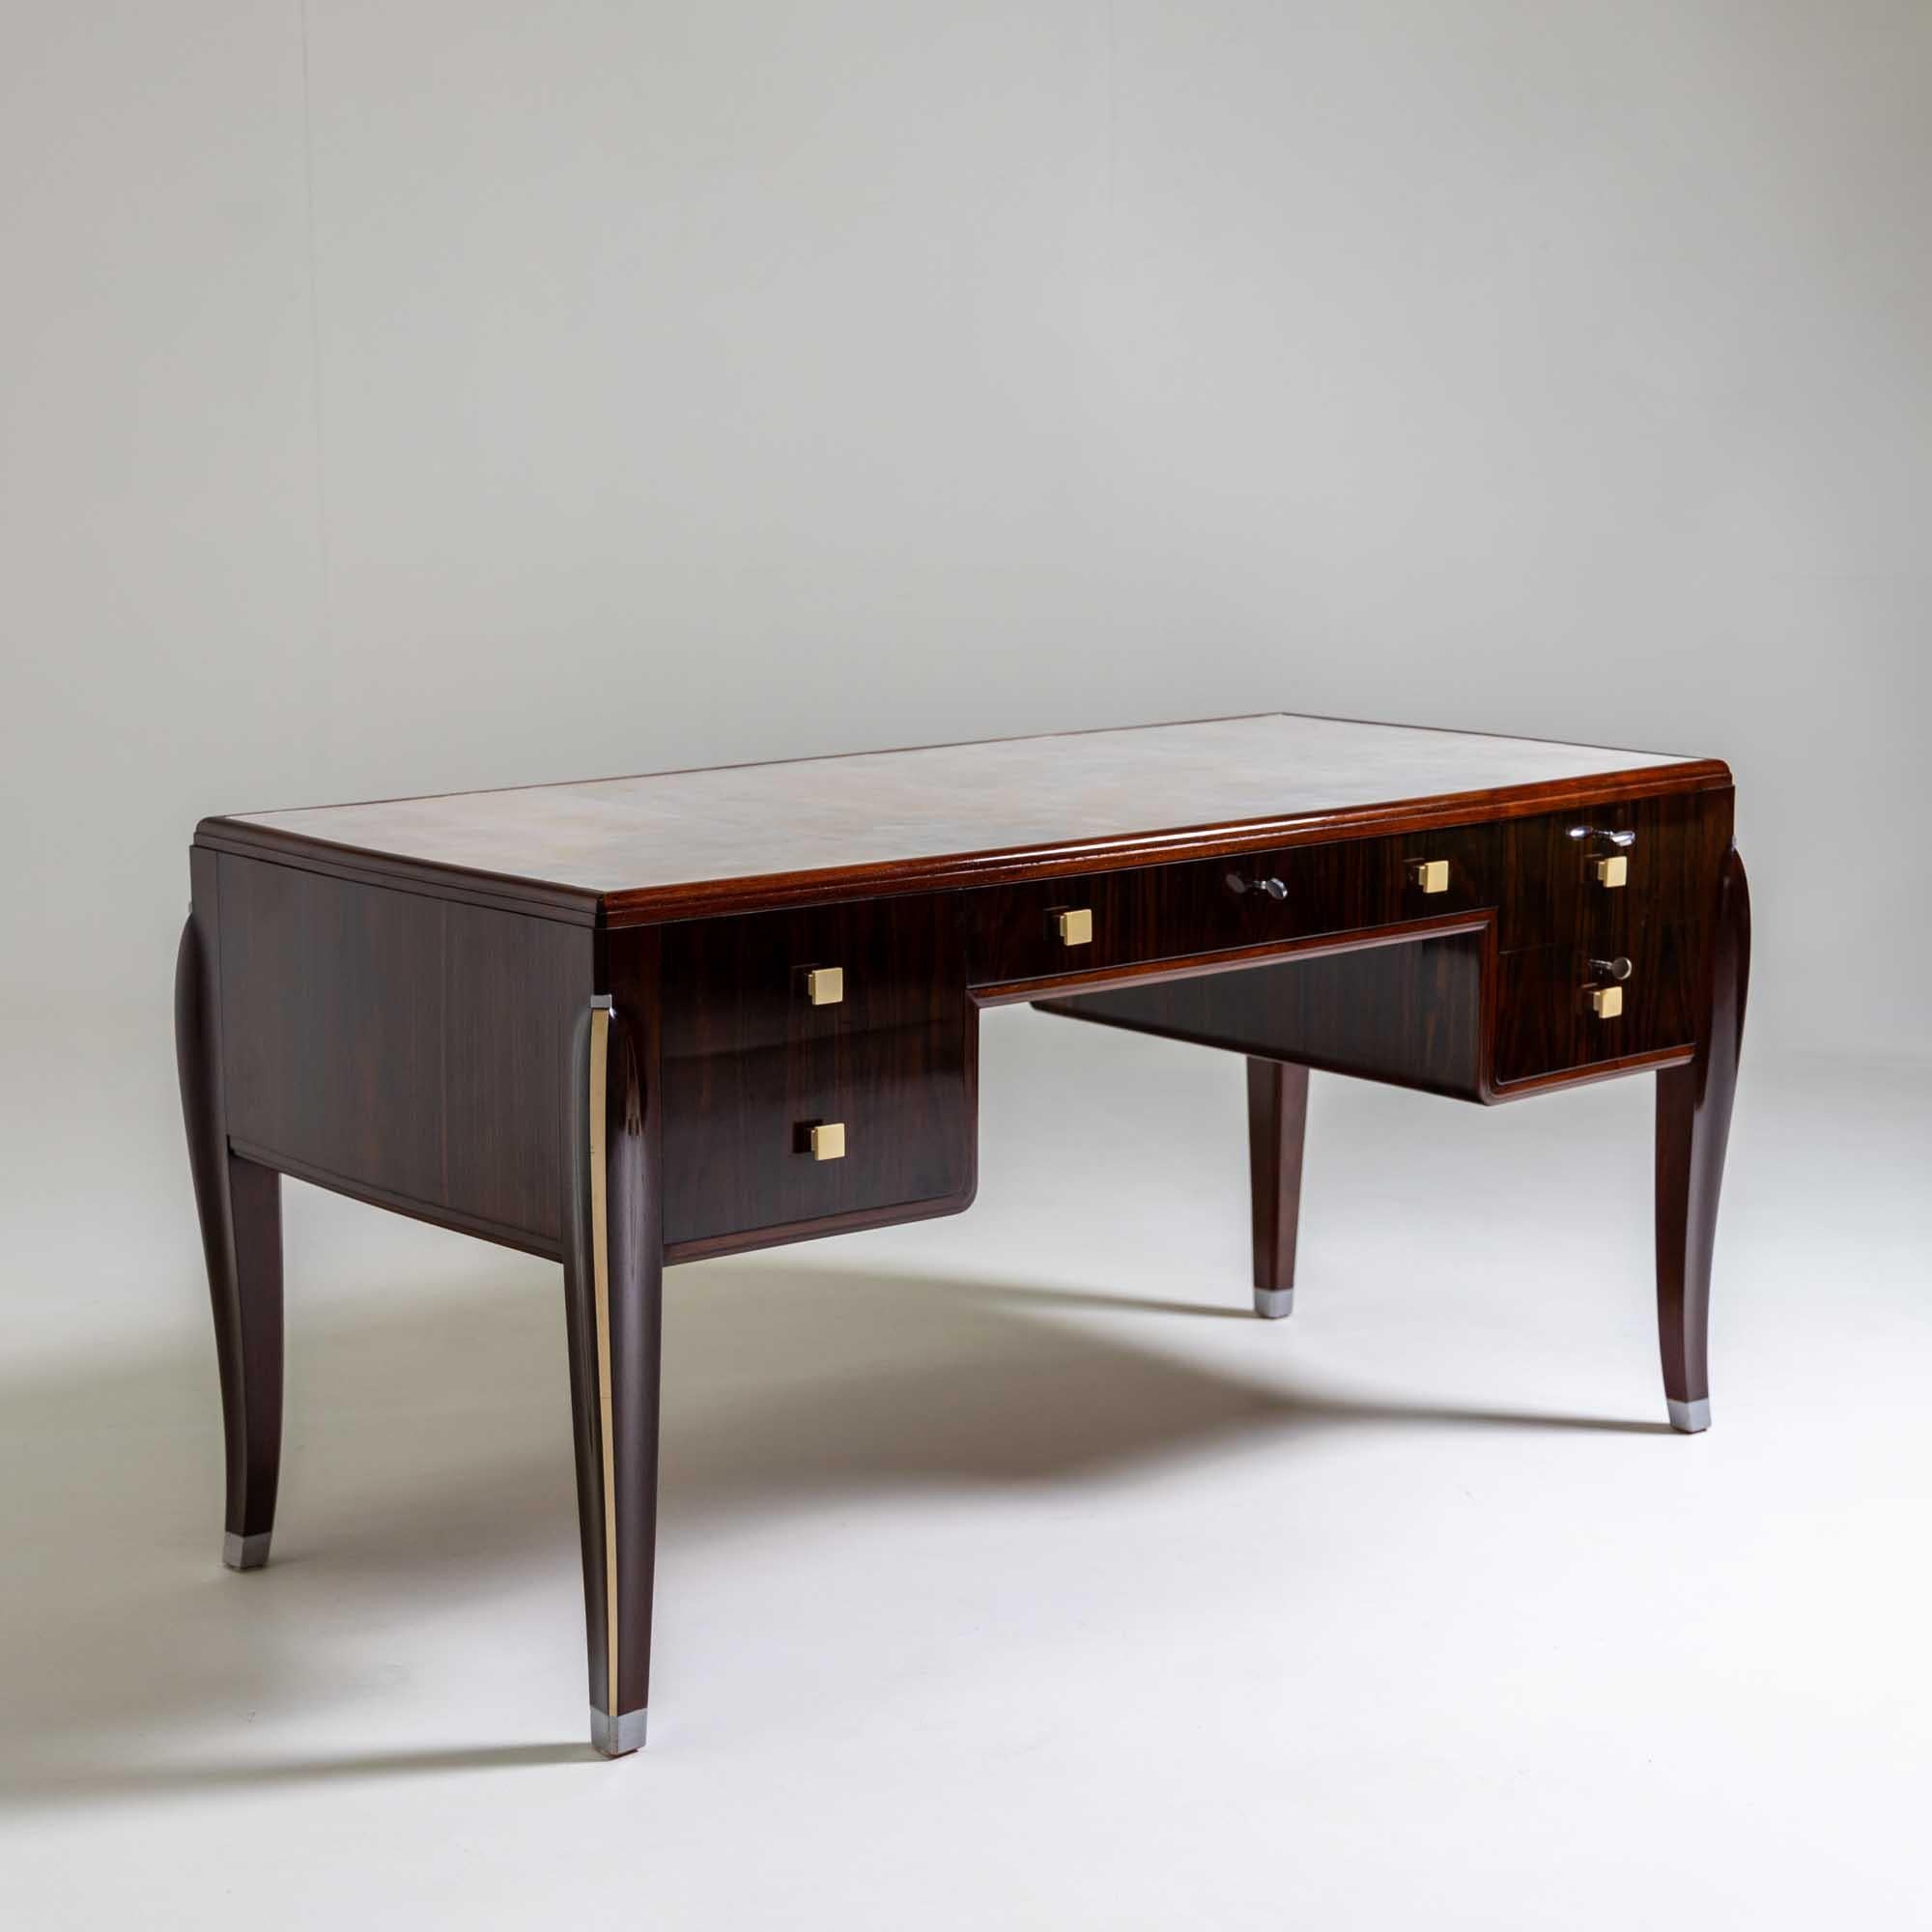 Art Deco Desk in the style of Jacques-Emile Ruhlmann (1879-1933), France, 1920s For Sale 2